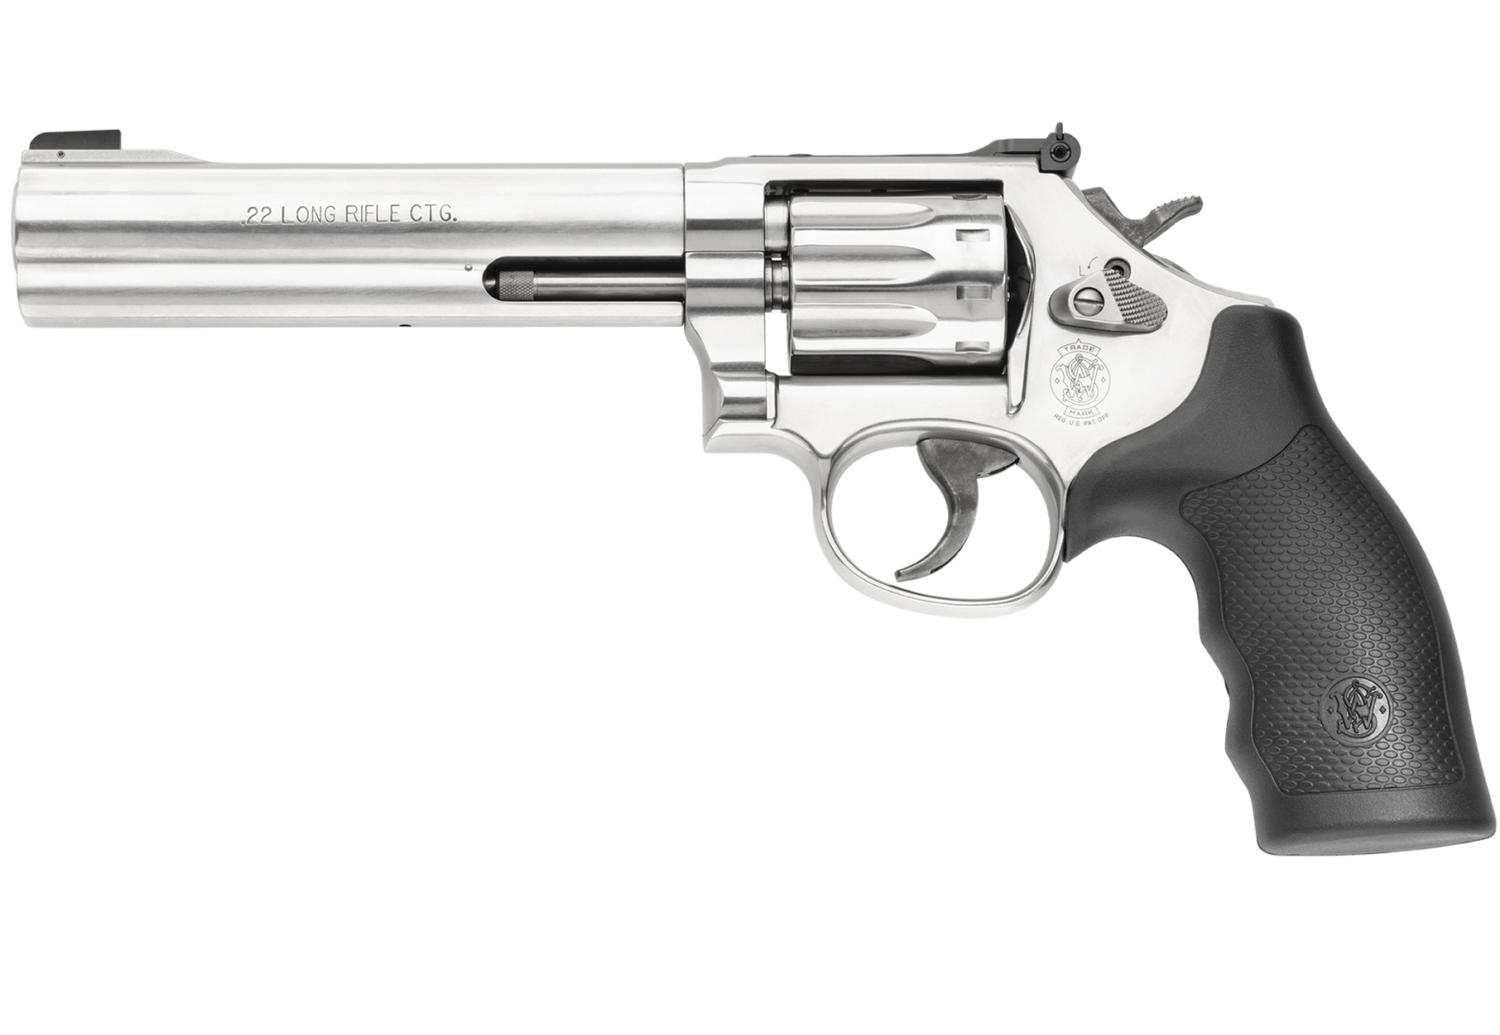  Model 617 K- 22 Masterpiece .22lr 10rd 6in - Satin Stainless